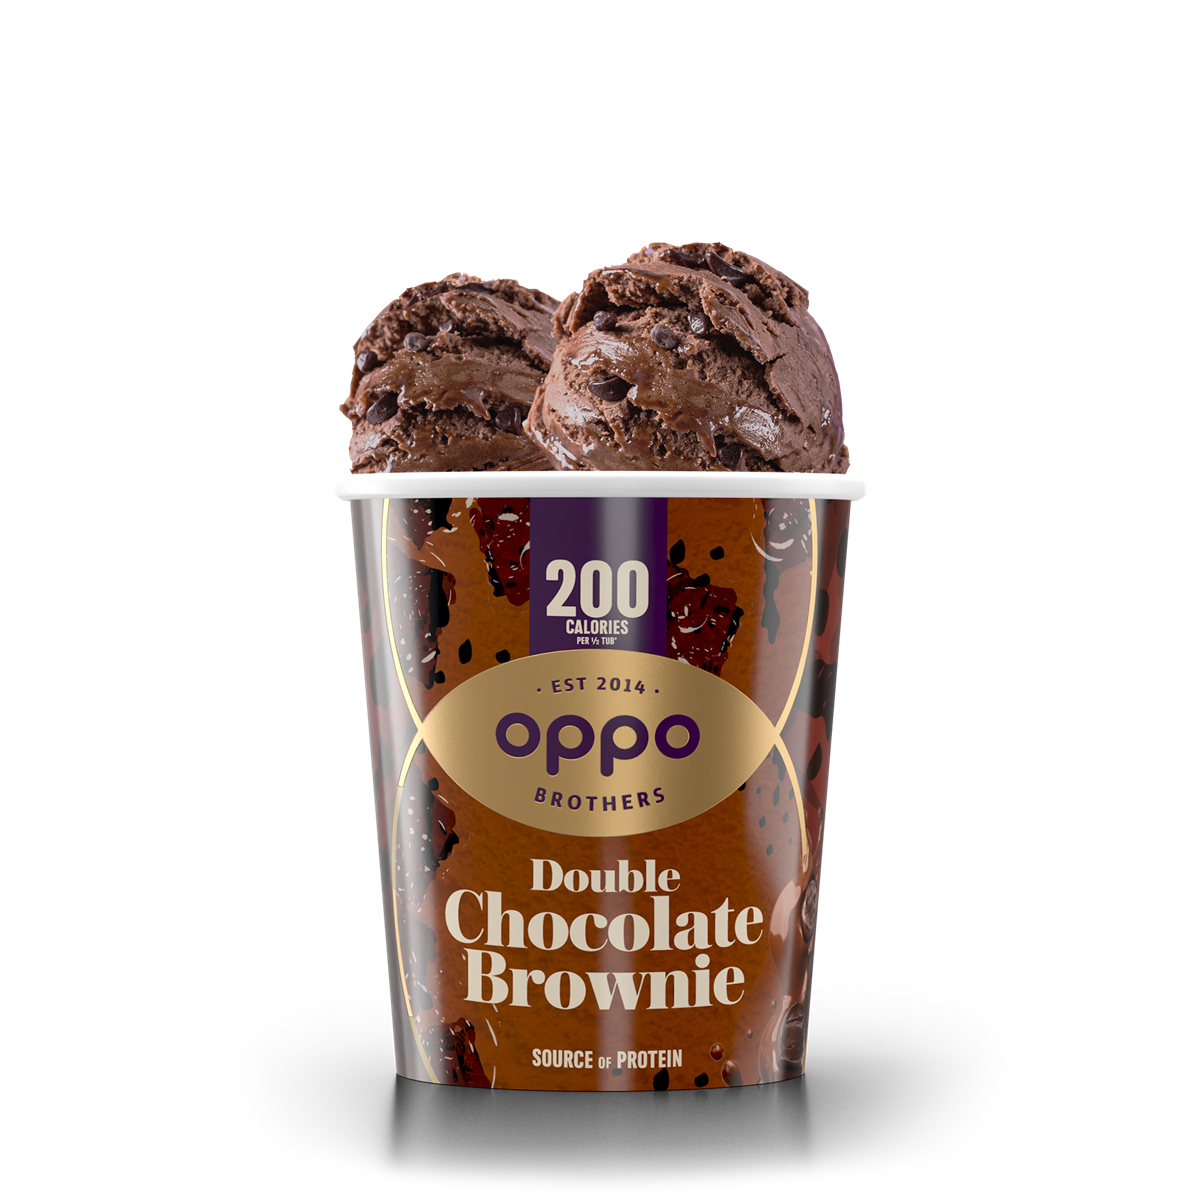 Oppo_Double Chocolate Brownie_UVP_5,99